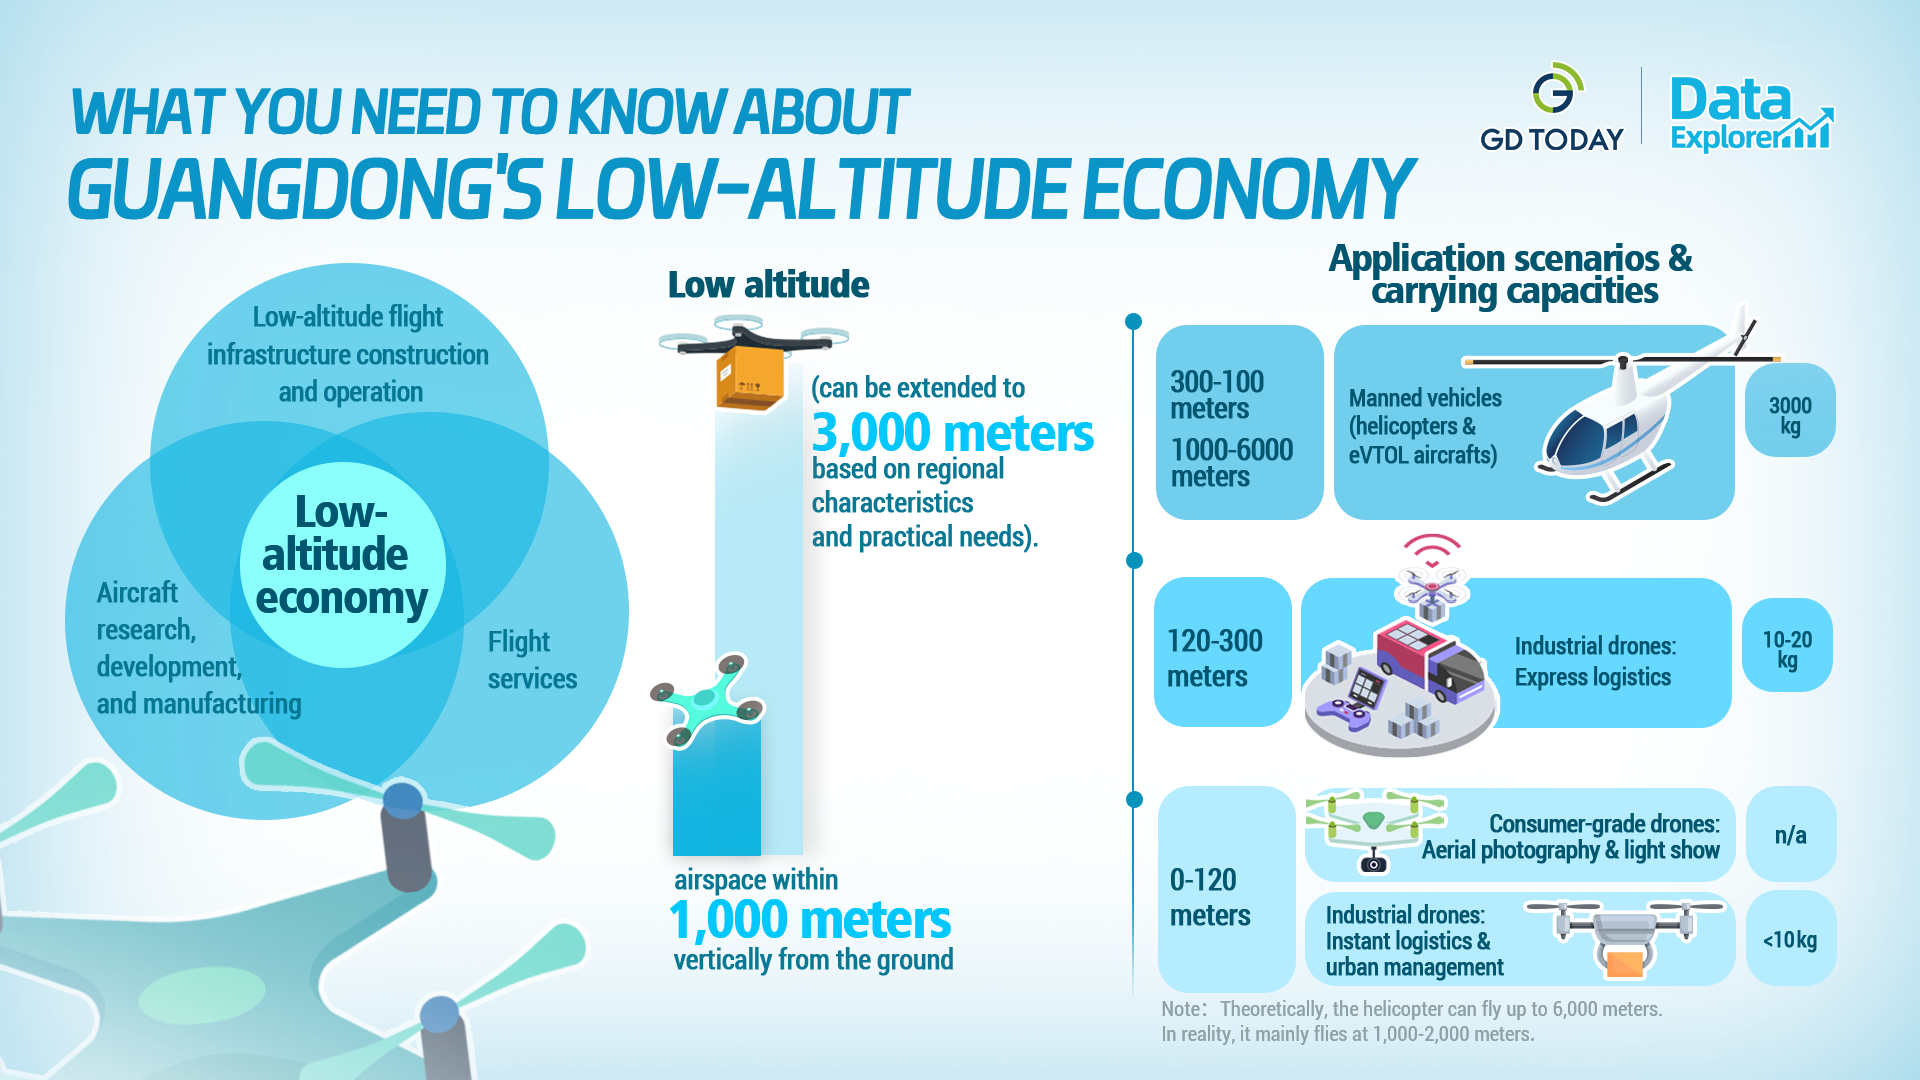 Data Explorer | What you need to know about Guangdong's low-altitude economy